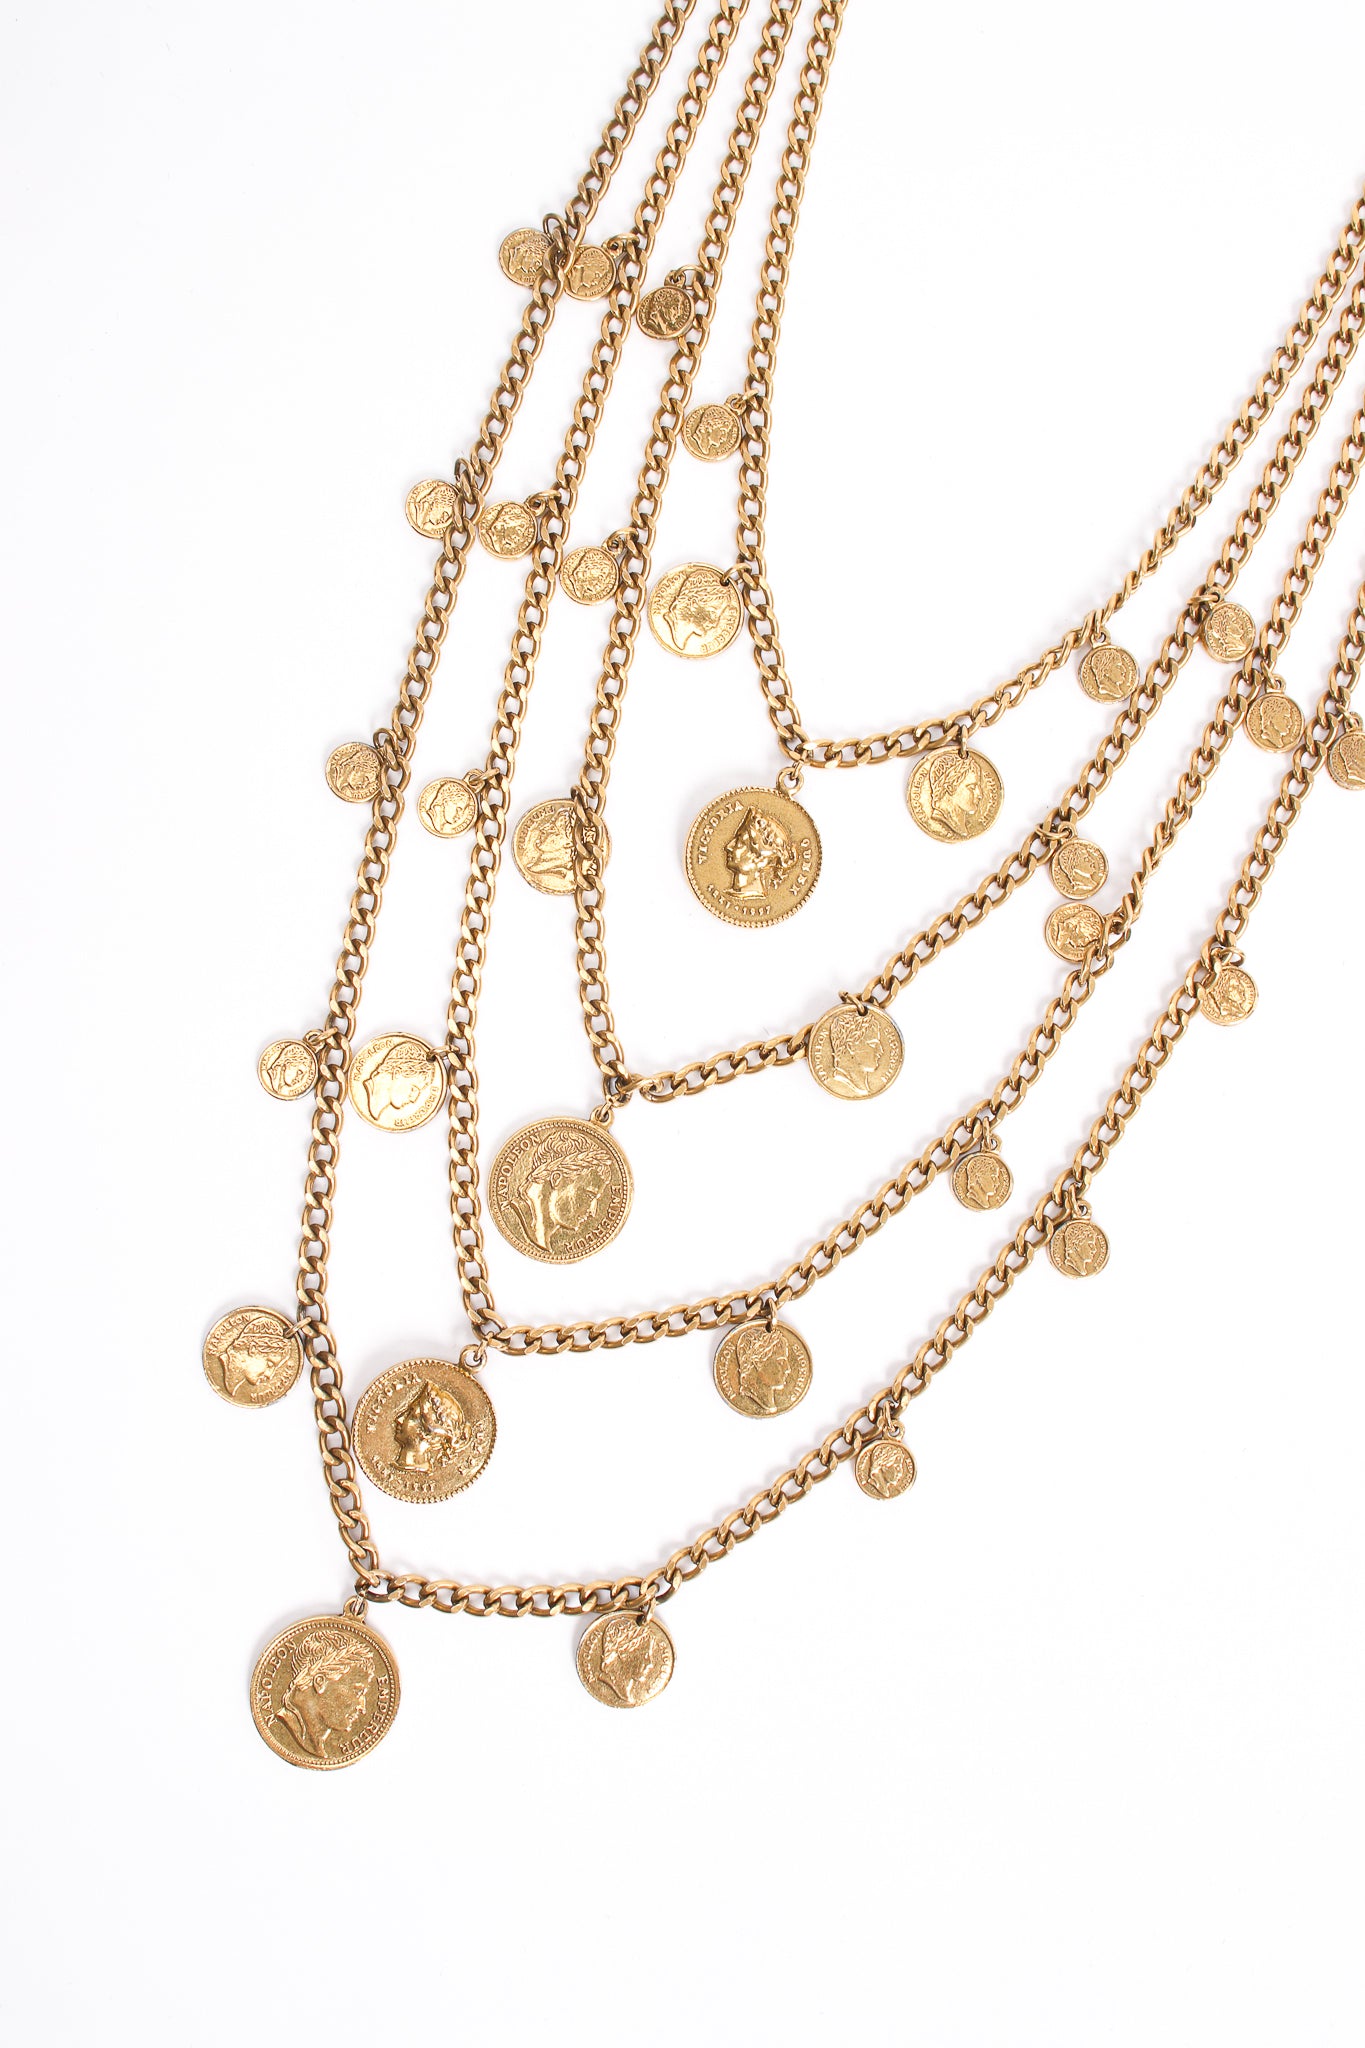 Vintage Goldette Multi-Strand Layered Coin Necklace at Recess Los Angeles